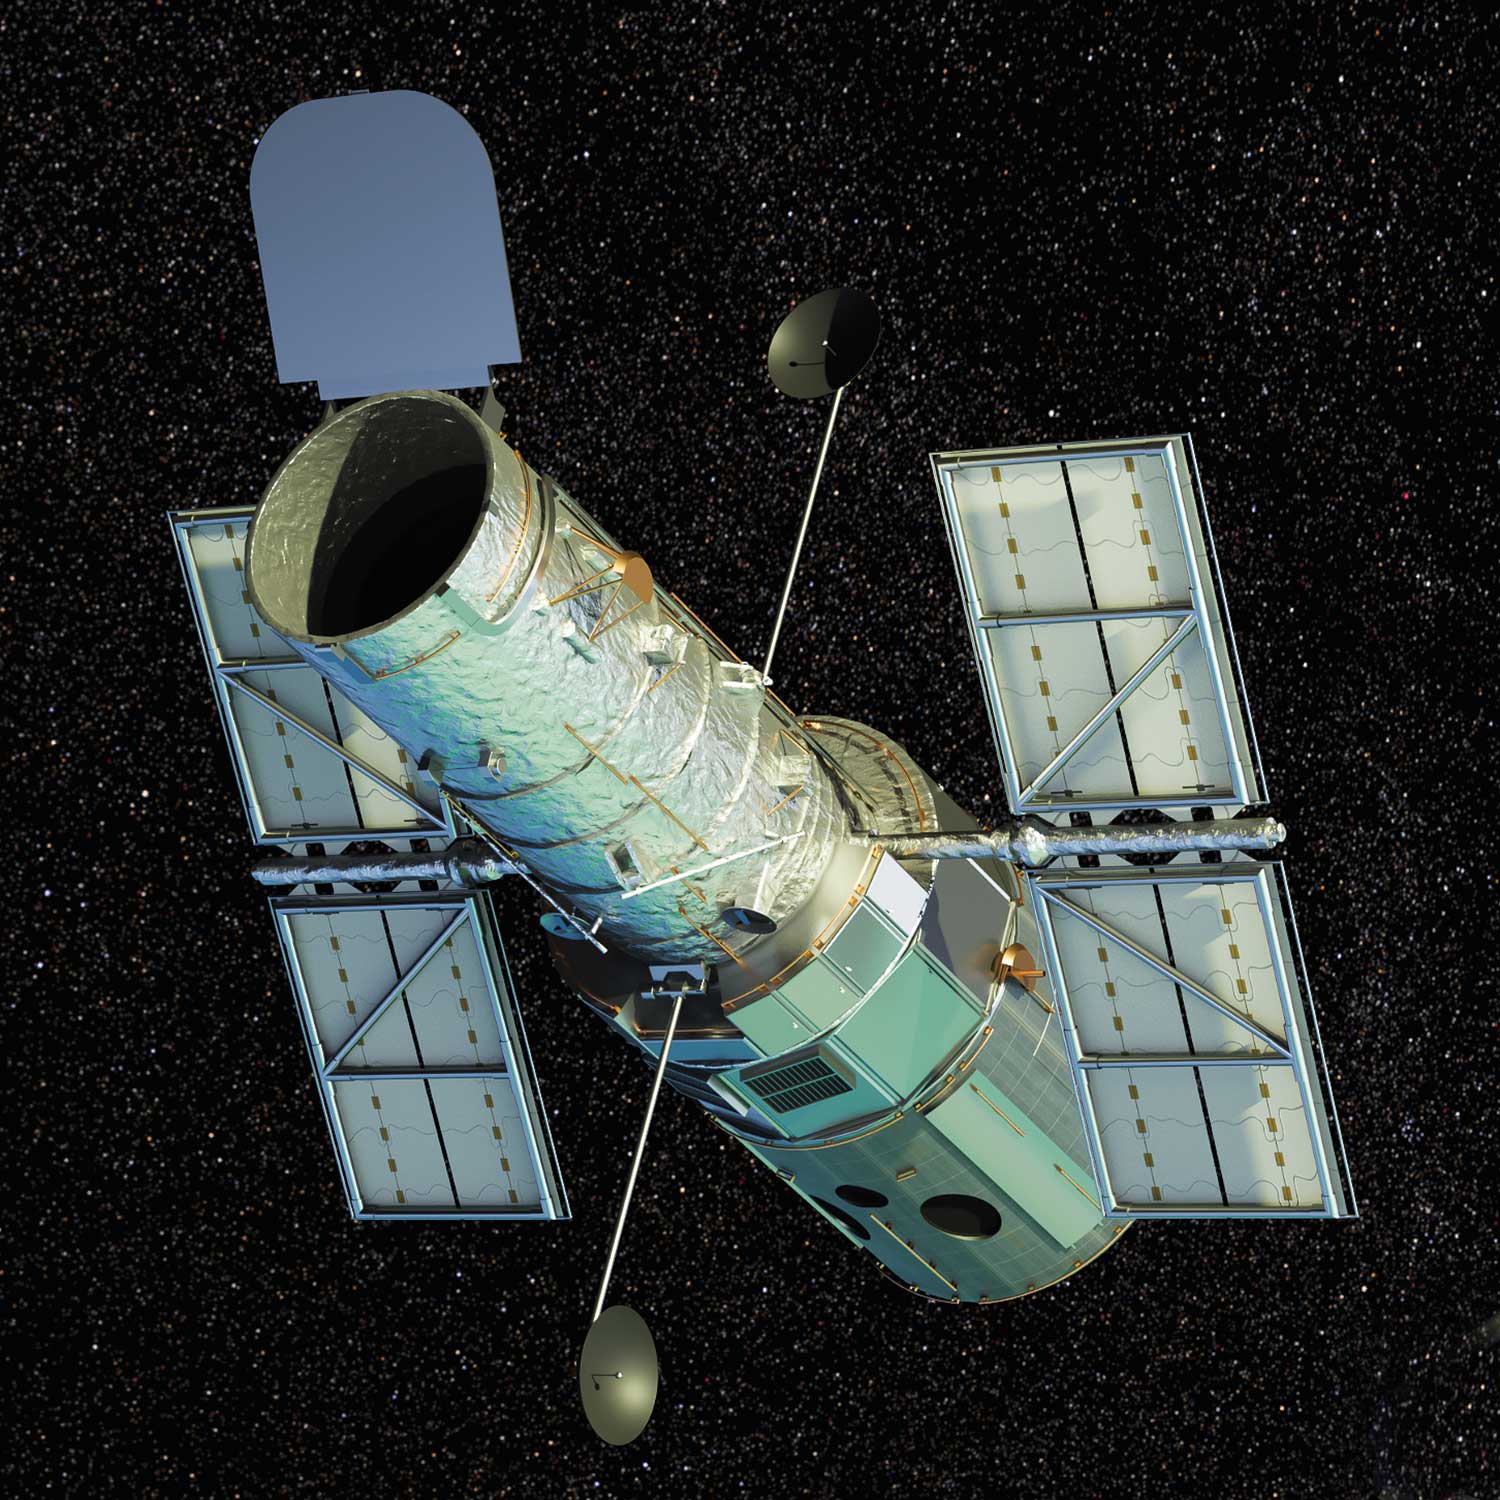 image of a hubble Space Telescope